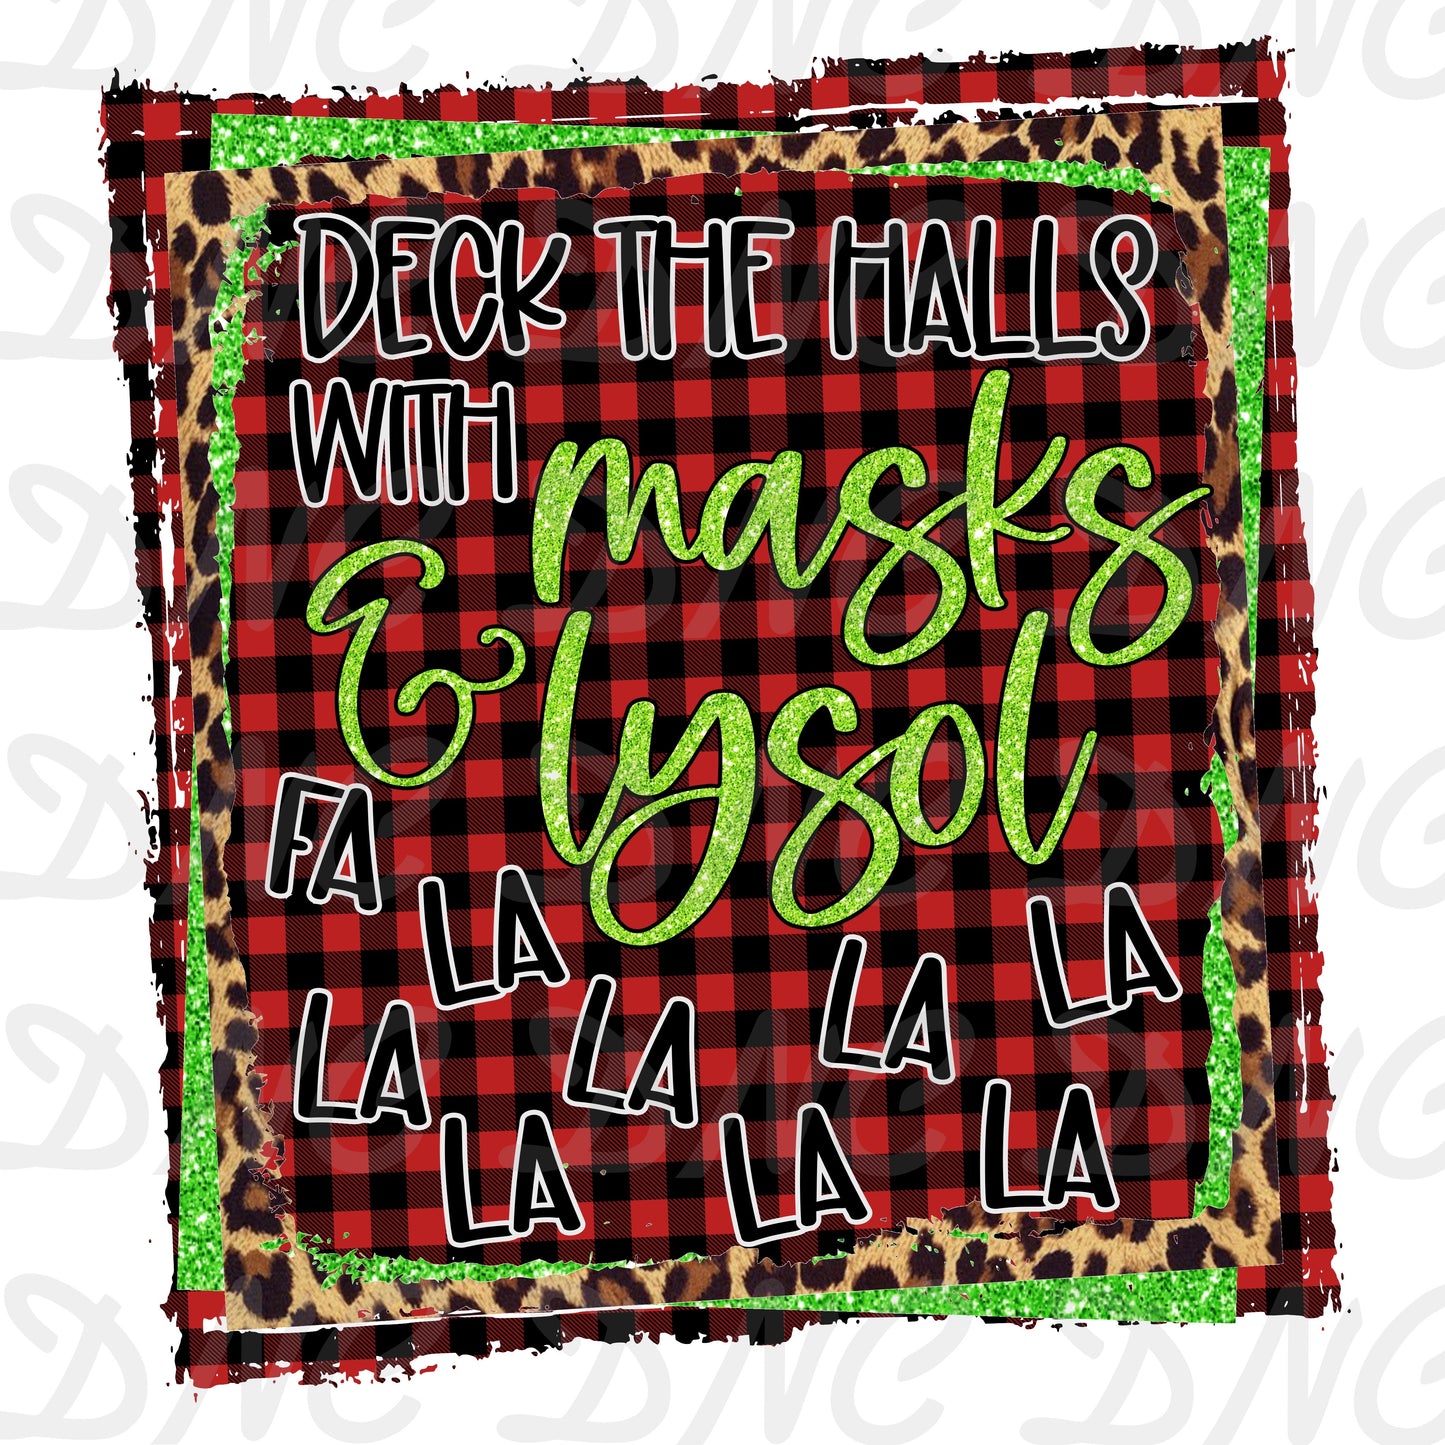 Deck the halls with masks and lysol- Sublimation